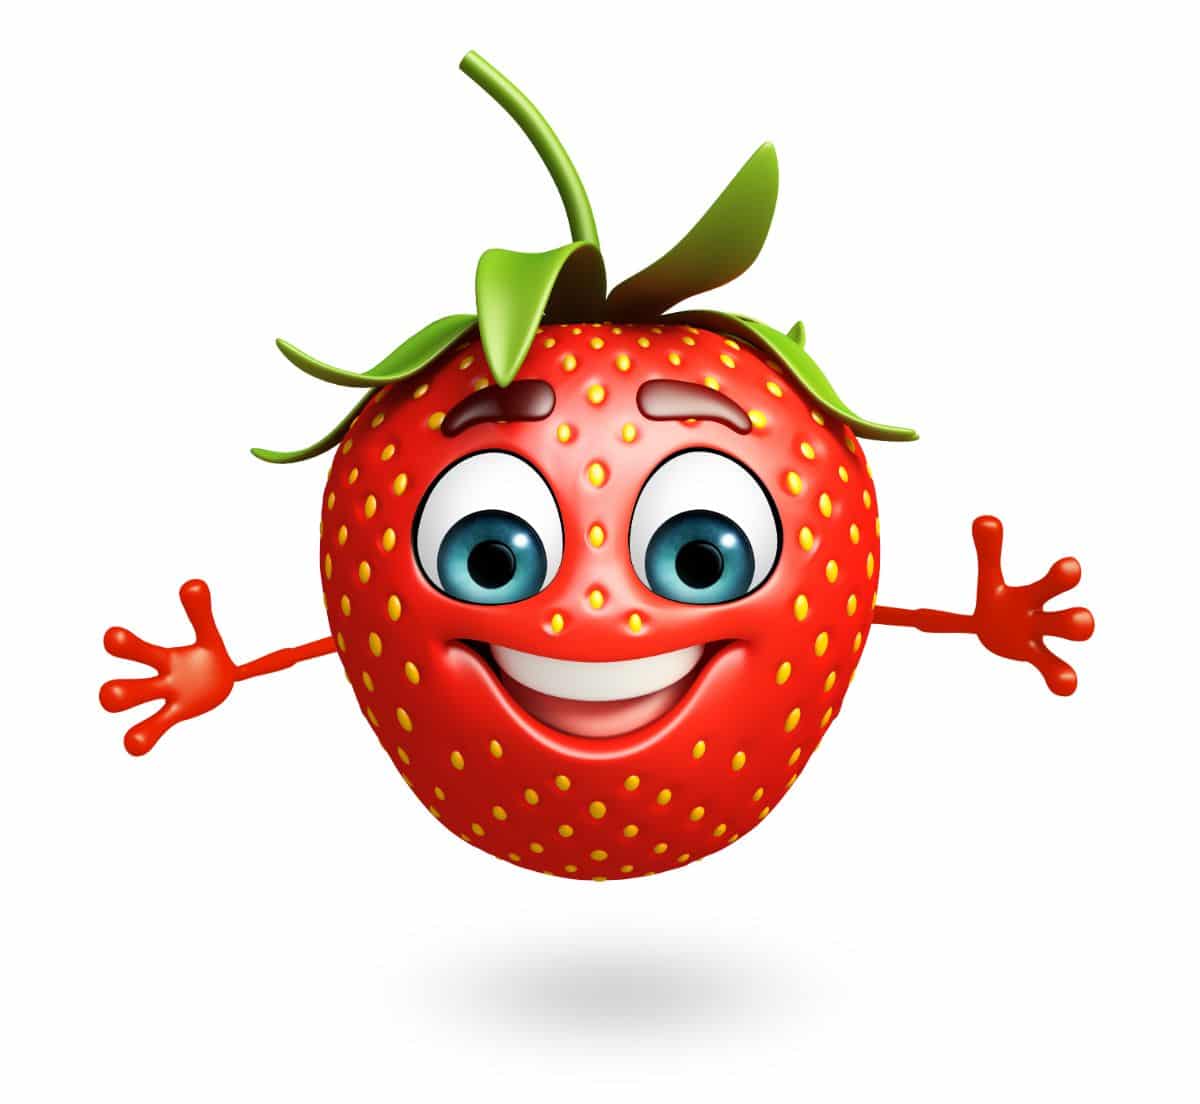 Strawberry with cartoonish face hugging position